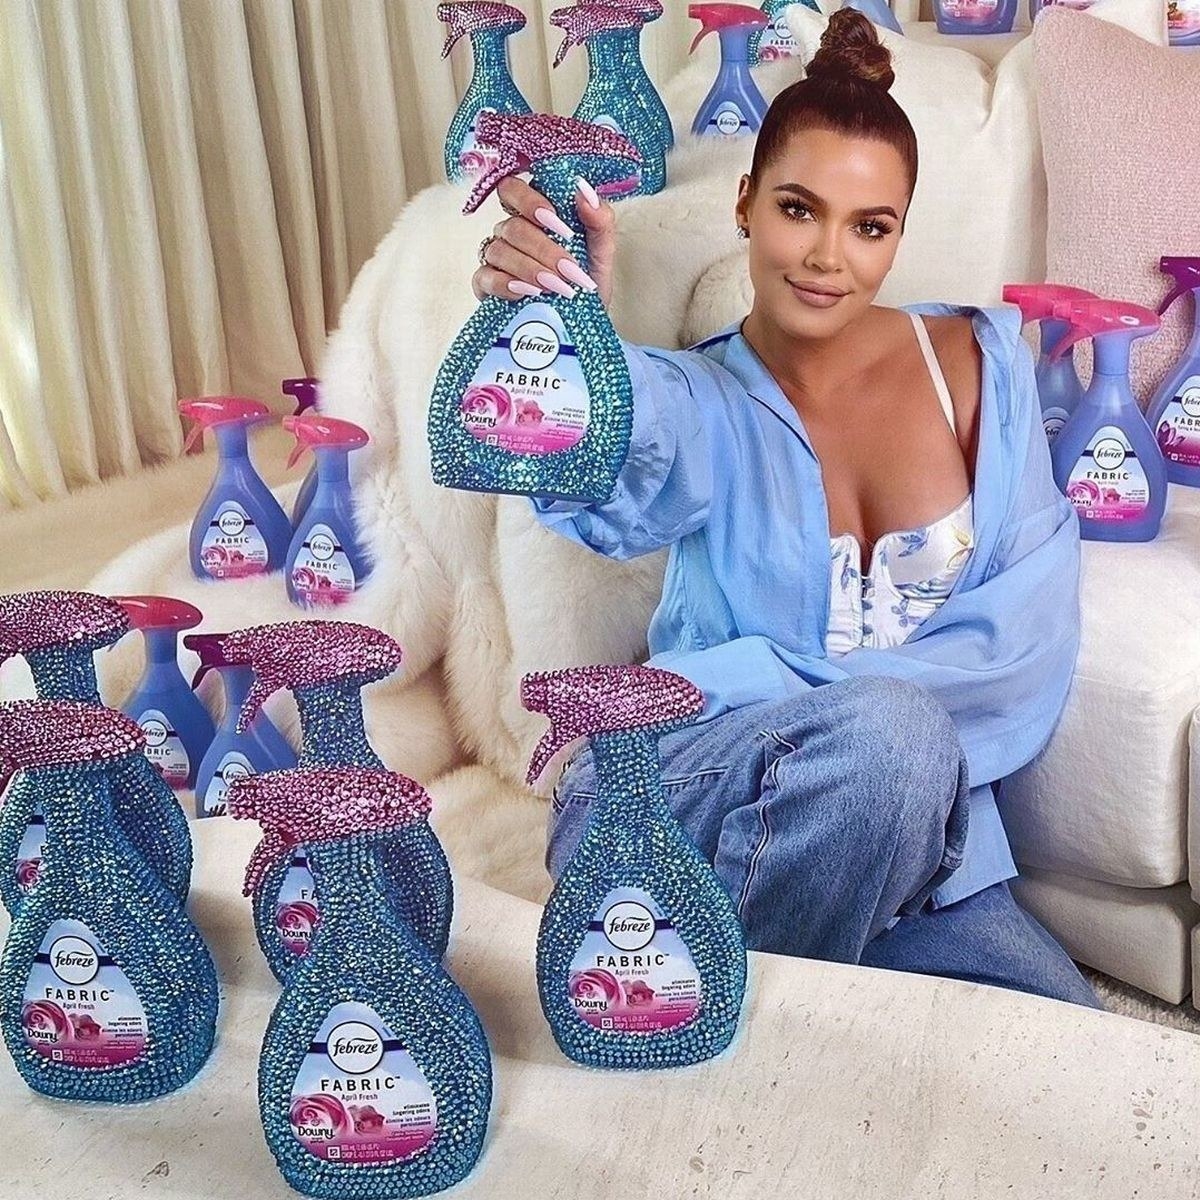 Khloe Kardashian sits in front of a white chair surrounded by spray bottles of Febreze fabric spray, some of which are bejewleled. She holds one out to the camera while smiling